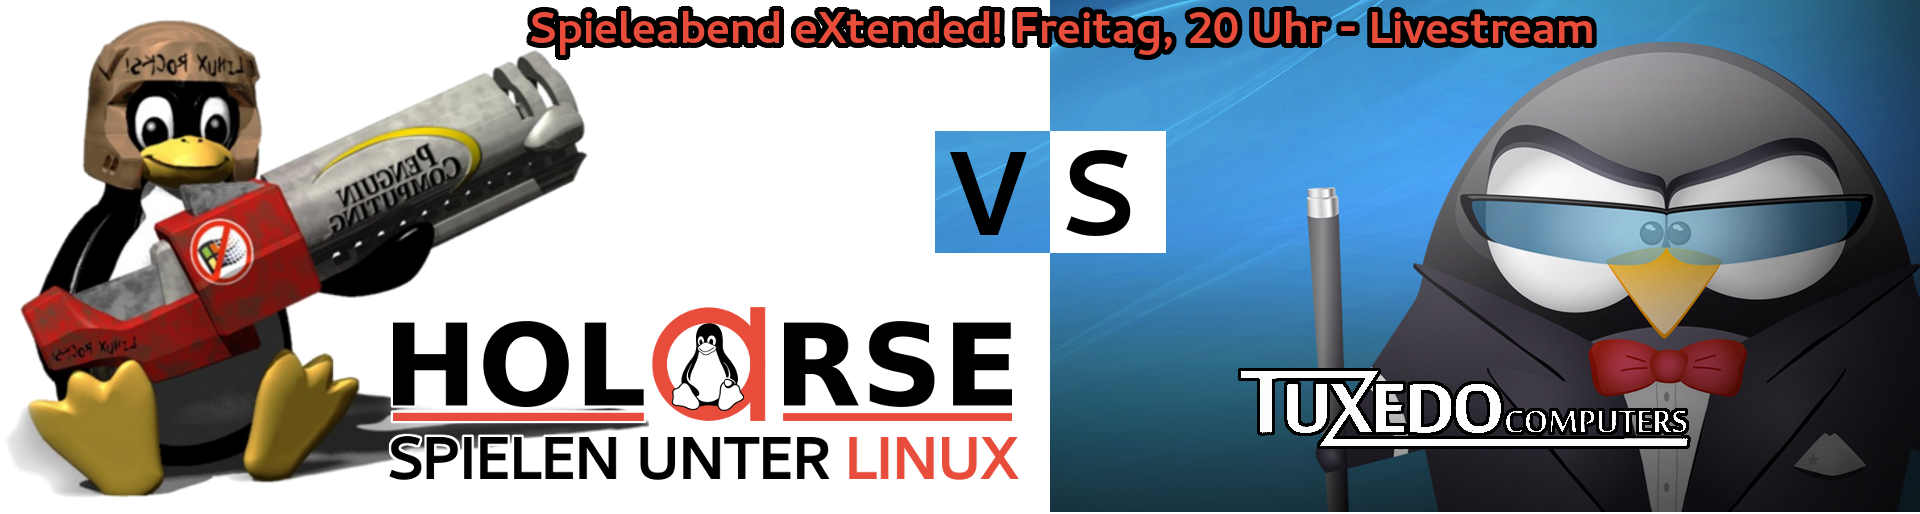 https://www.holarse-linuxgaming.de/sites/default/files/2017-09-13-1/Spieleabend%20extended.png